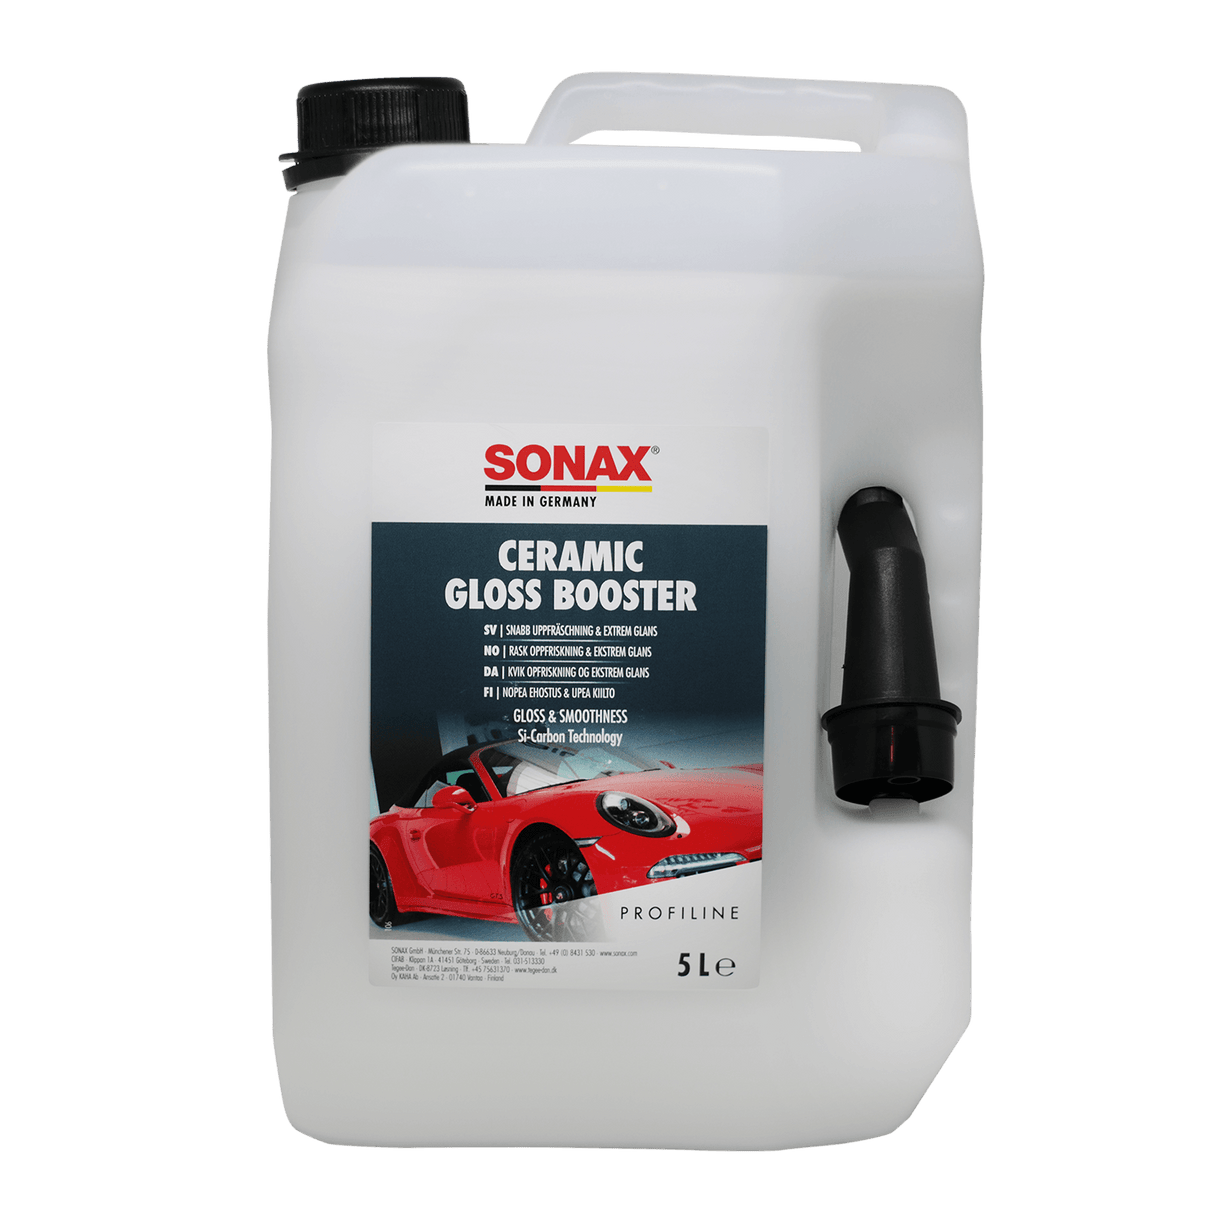 SONAX Ceramic Gloss Booster - Xpert Cleaning